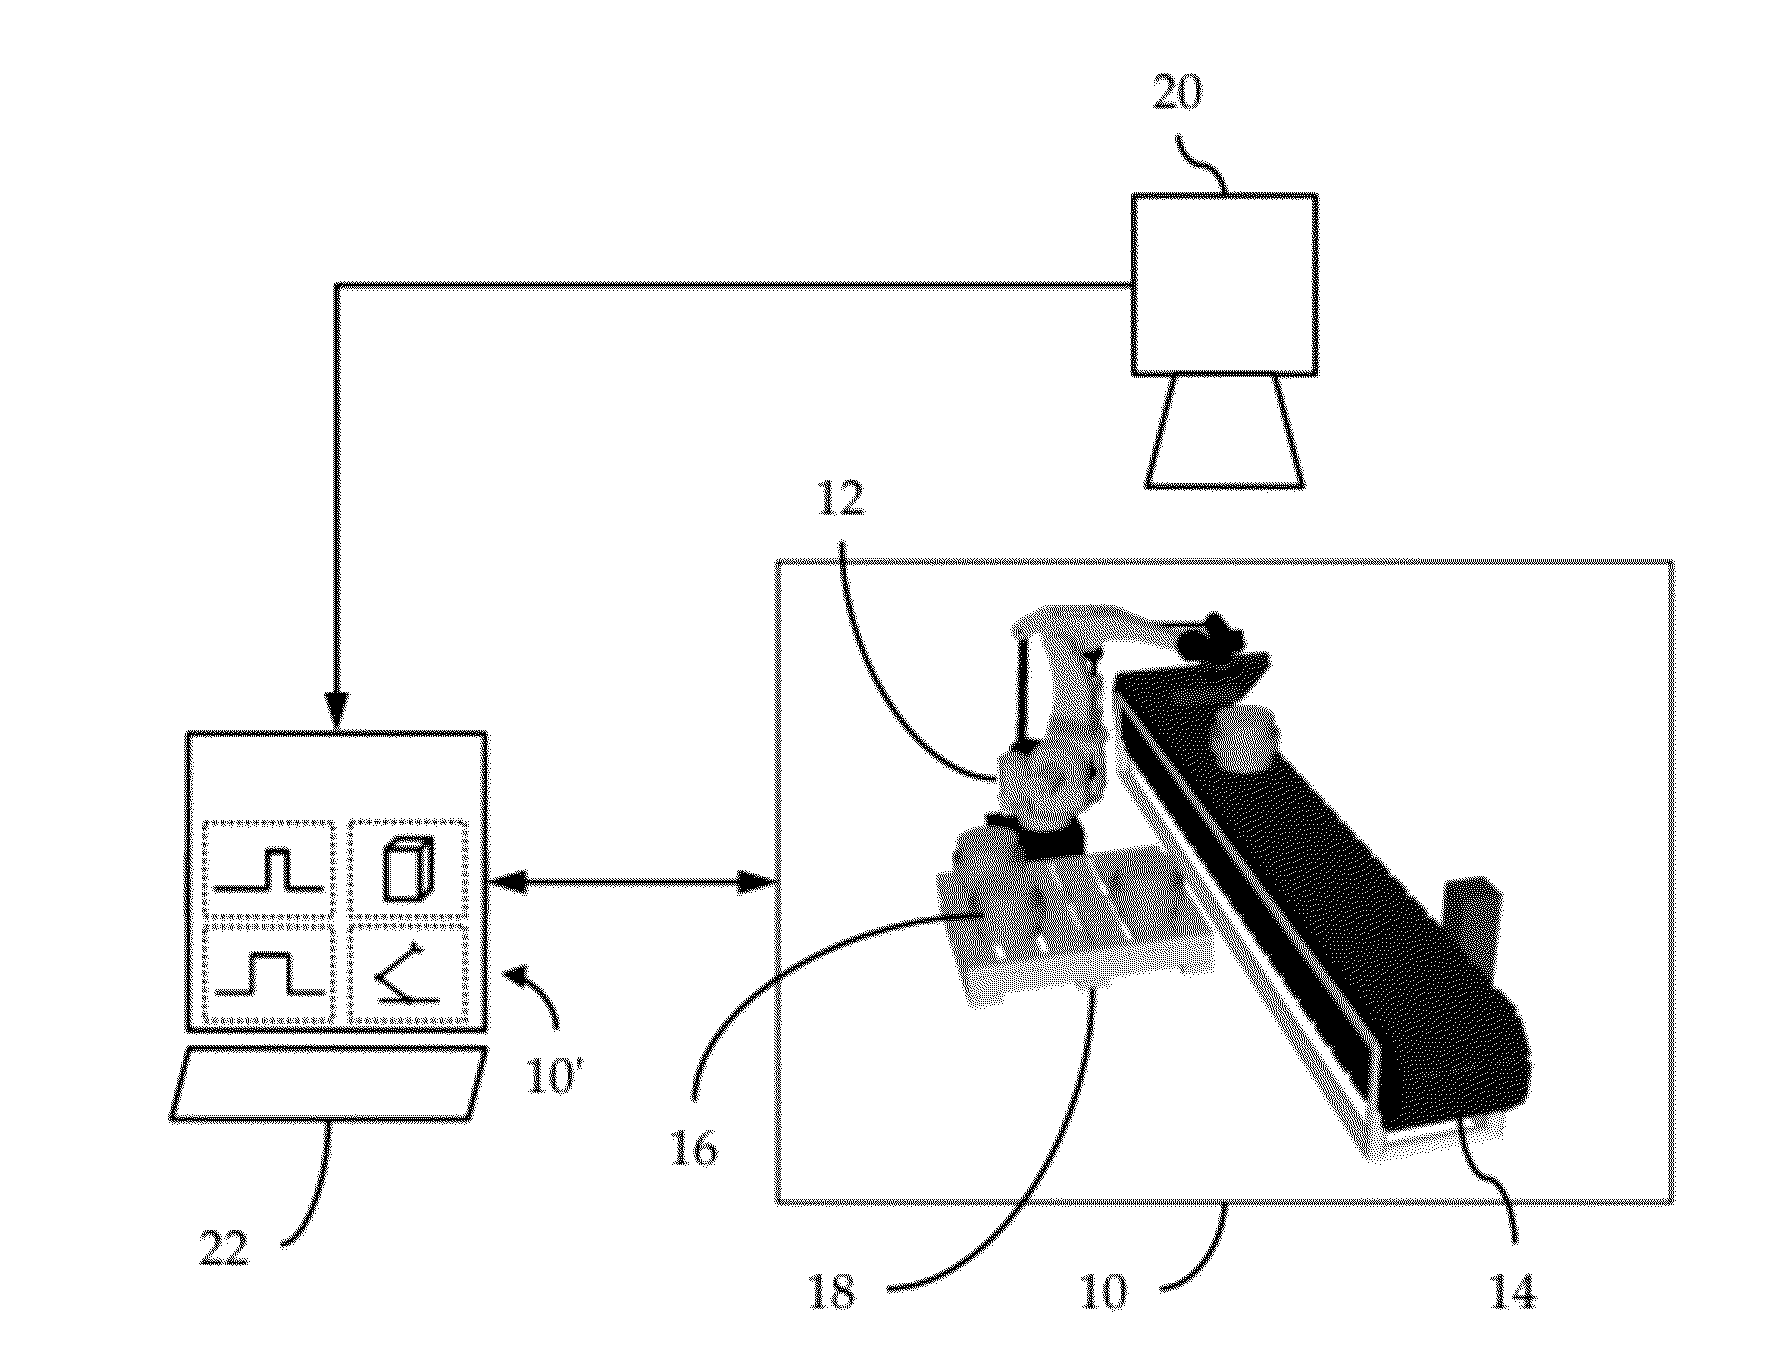 Method to Model and Program a Robotic Workcell